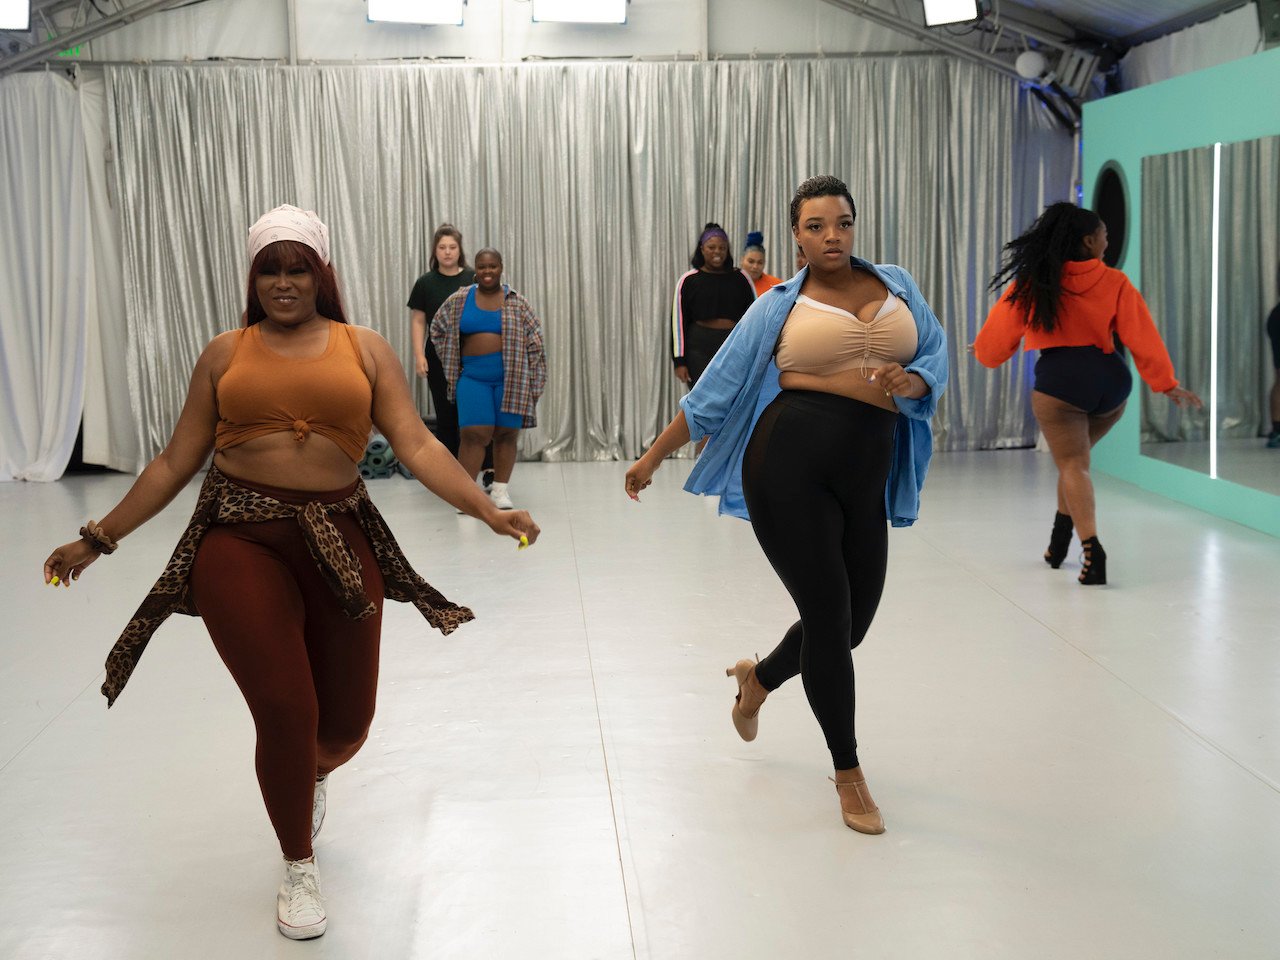 Jasmine Morrison and Ashley Williams dance front and center in rehearsal on 'Lizzo's Watch Out for the Big Grrrls'.